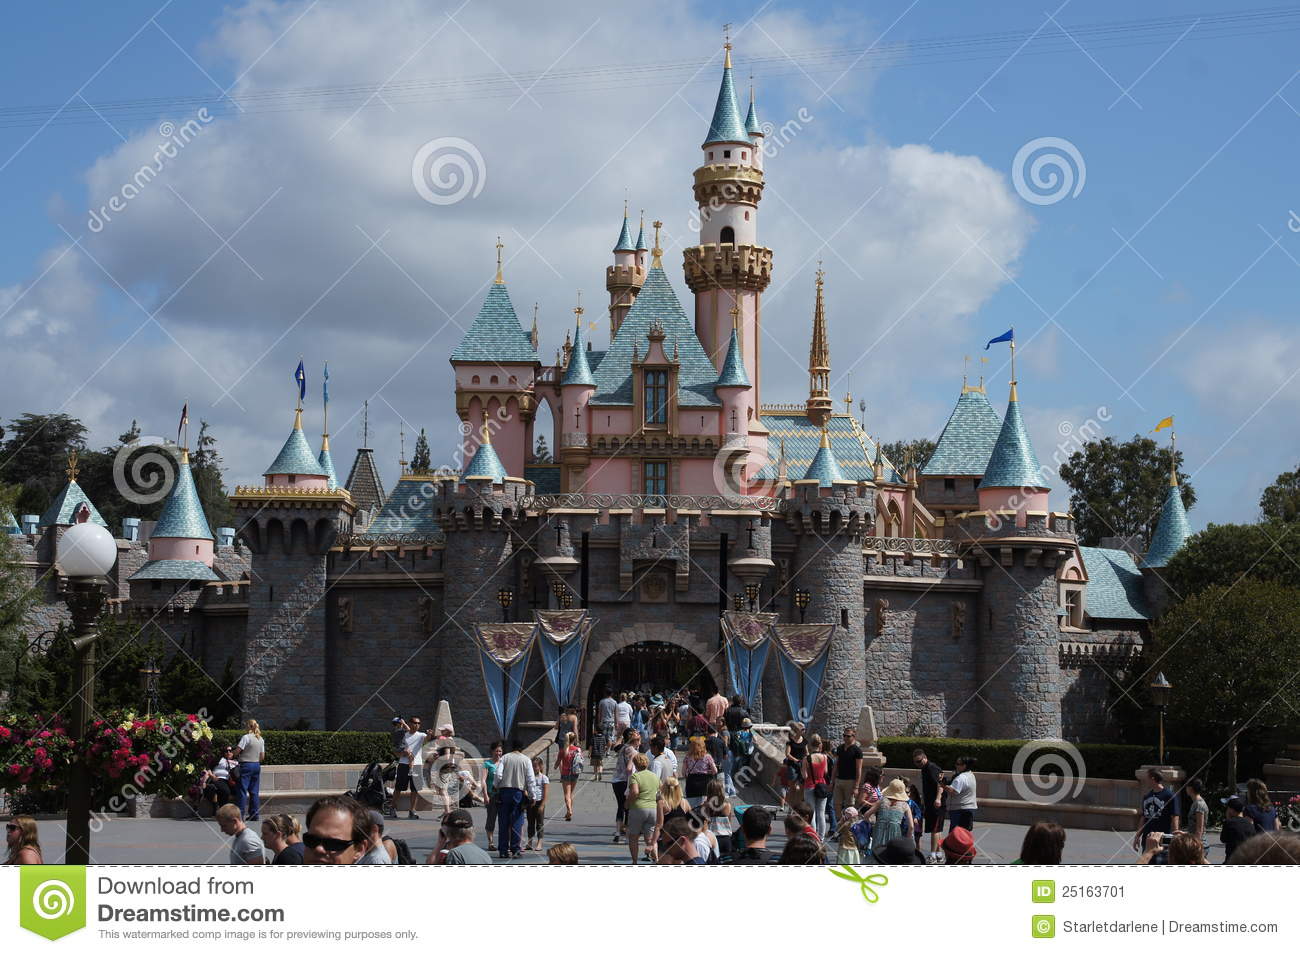 Castle At The End Of Main Street In Disneyland In Anaheim California